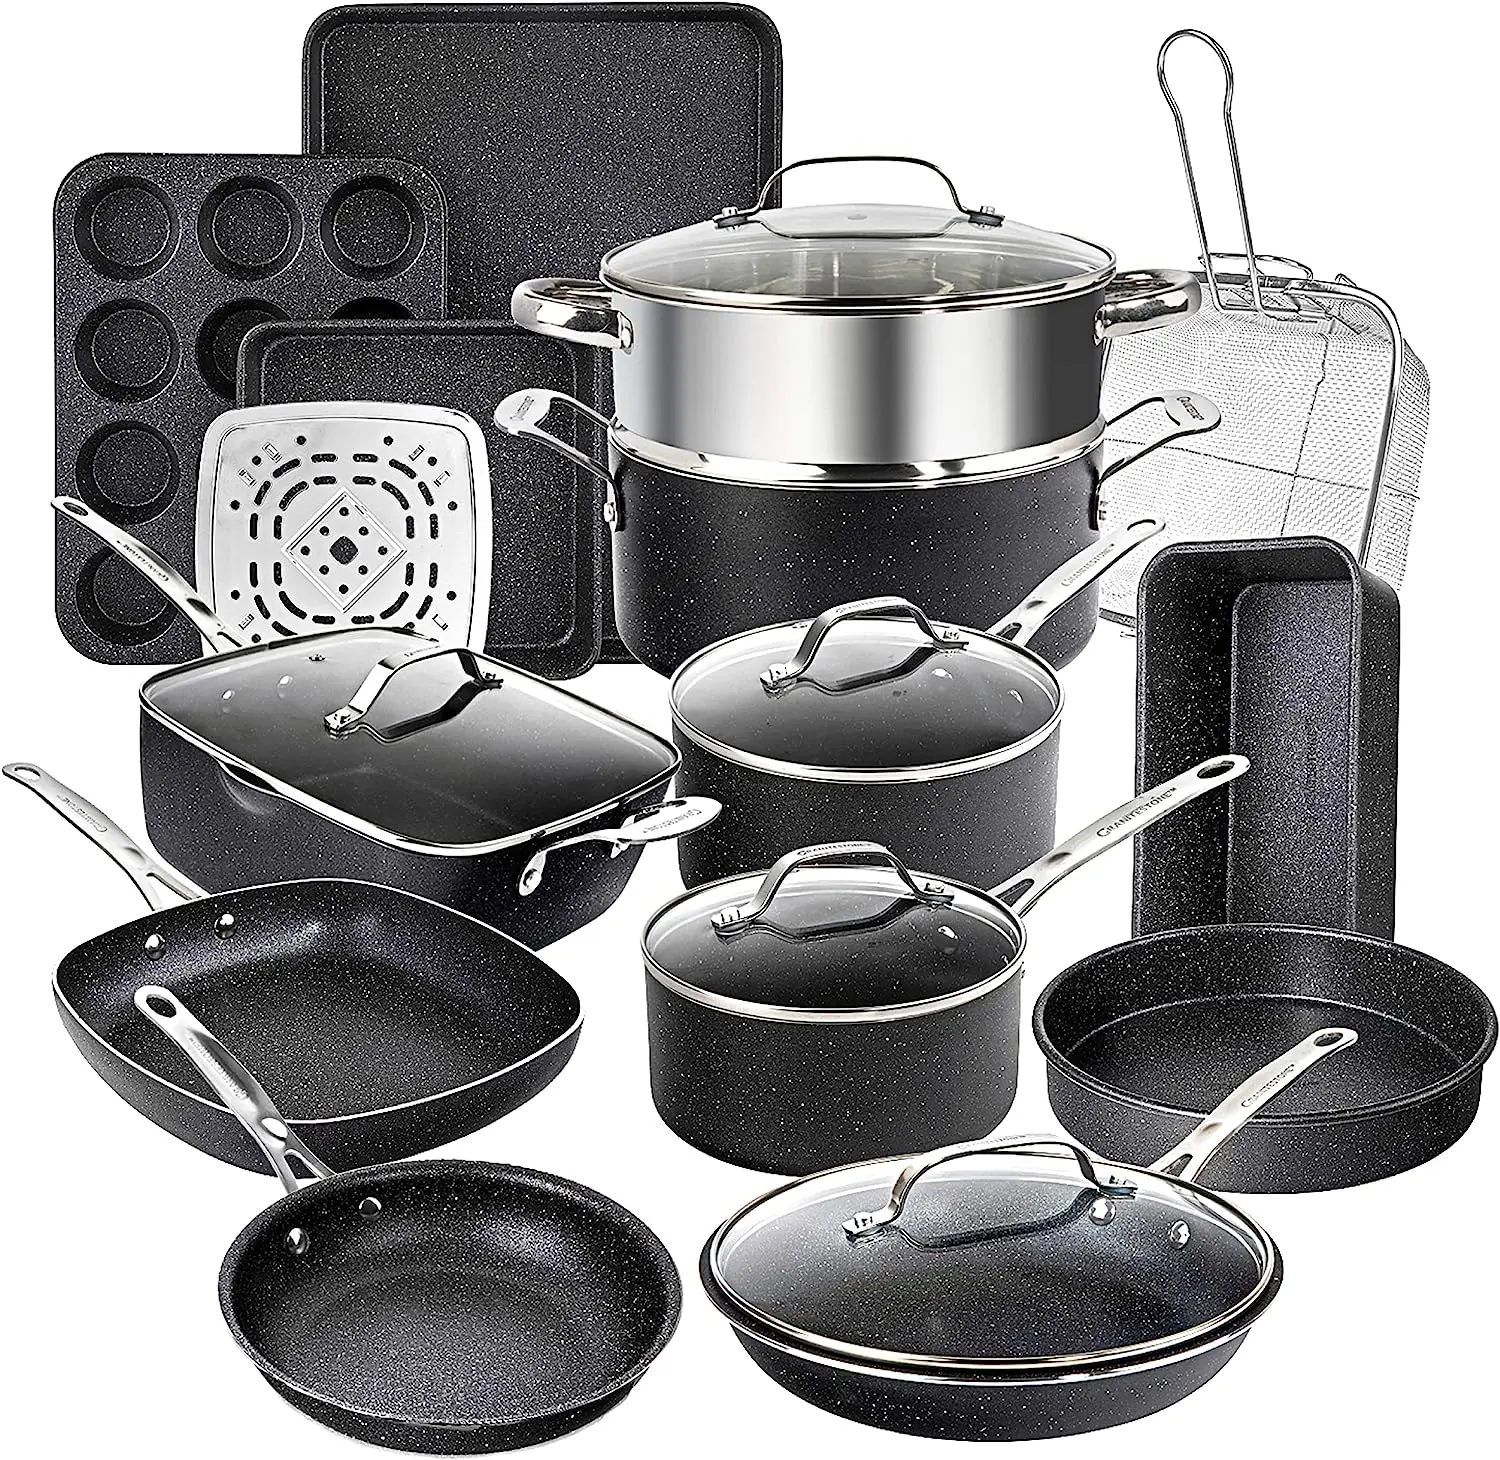 

Black Pots and Pans Set Nonstick, 20 Pc Kitchen Cookware Set & Bakeware Set with Mineral & Diamond Coating, Long Lasting